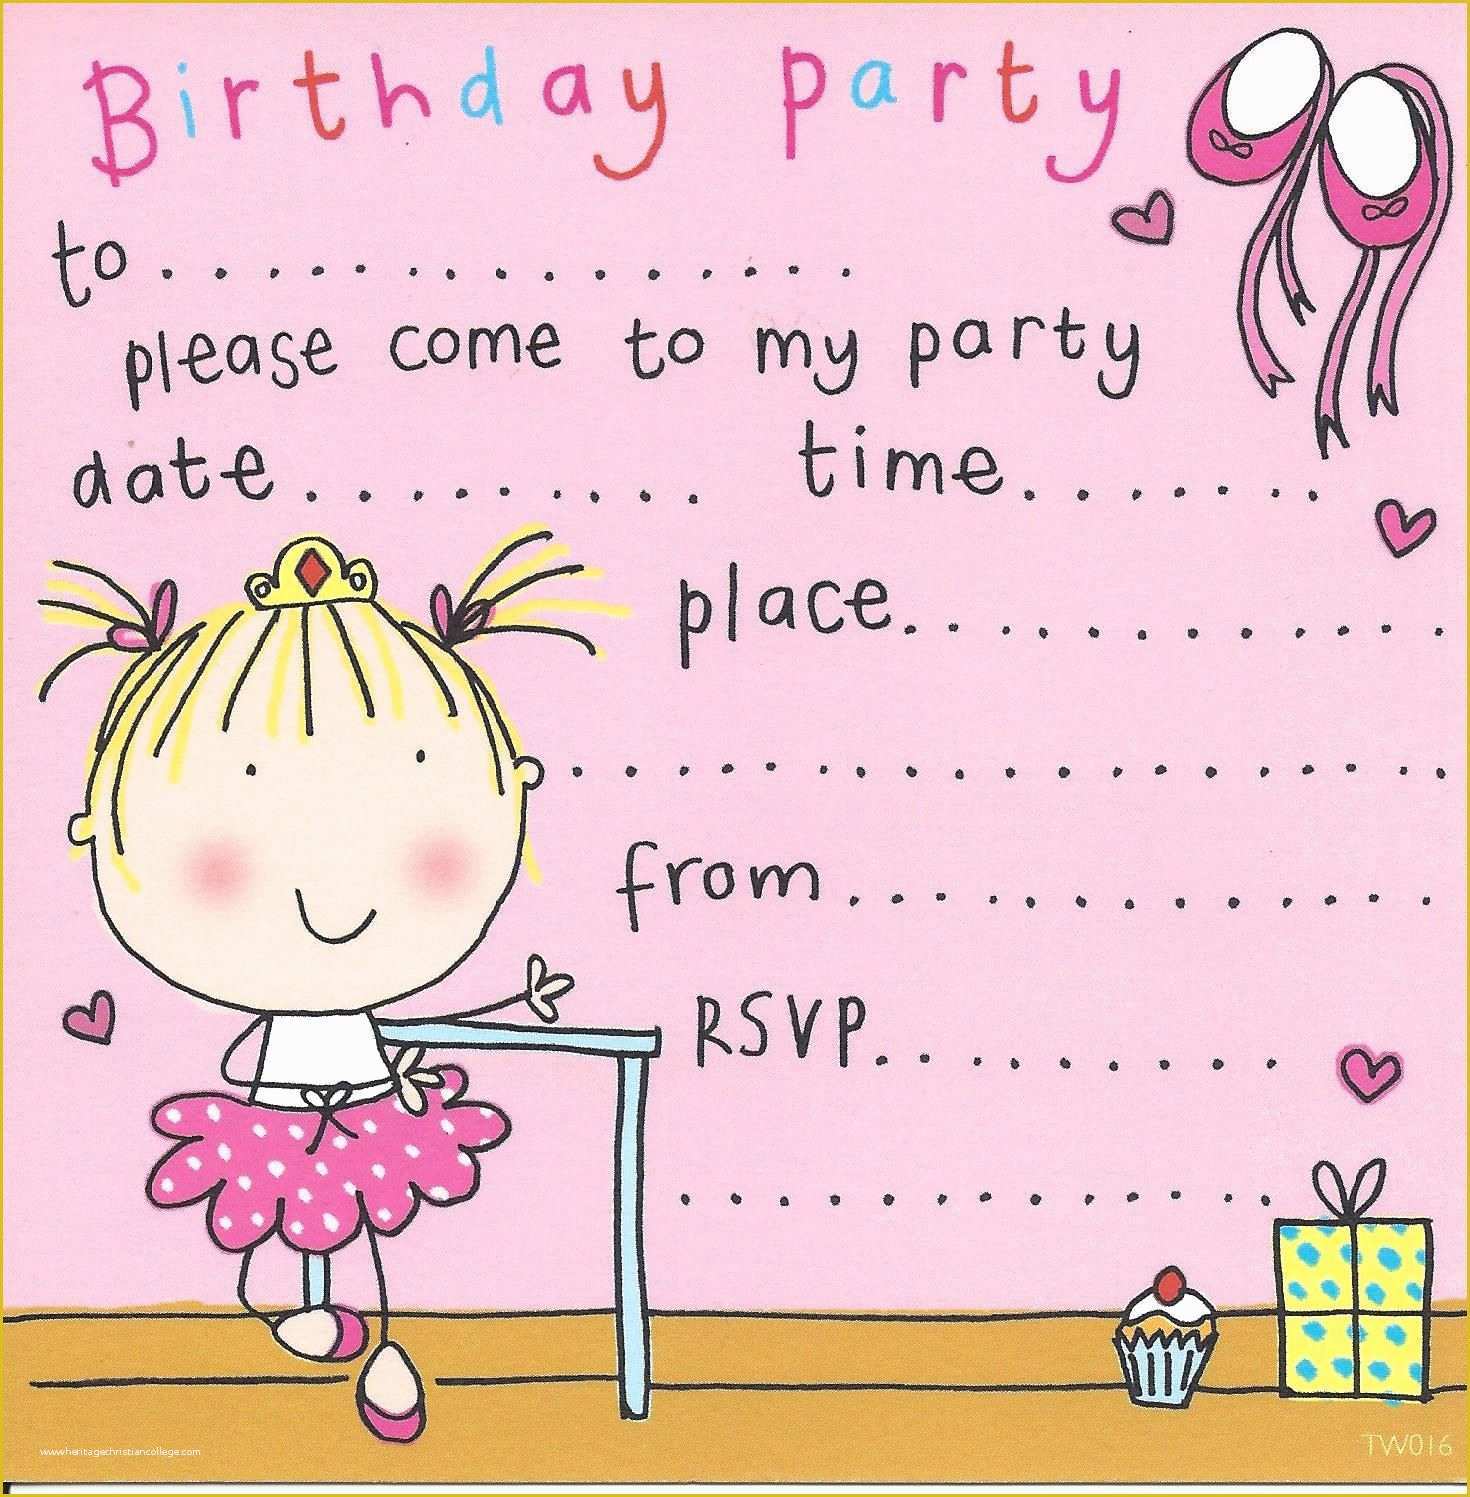 Birthday Party Invitations for Kids Free Templates Of Party Invitations Birthday Party Invitations Kids Party